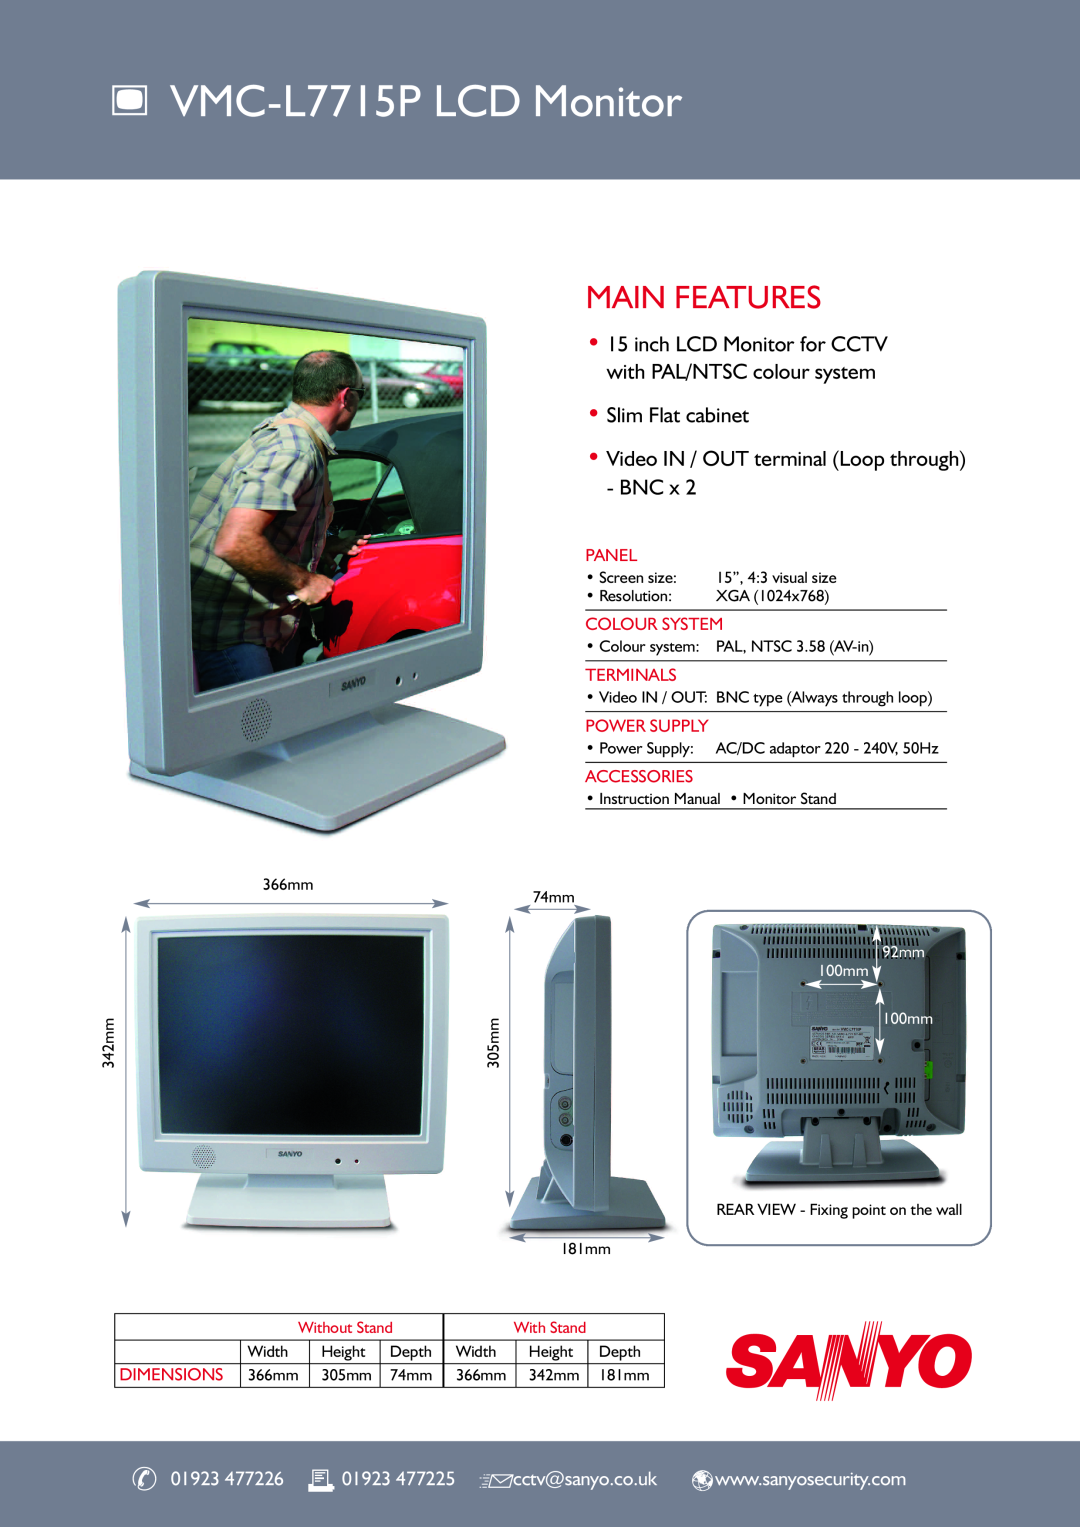 Sanyo dimensions VMC-L7715P LCD Monitor, Main Features, Slim Flat cabinet Video IN / OUT terminal Loop through - BNC x 